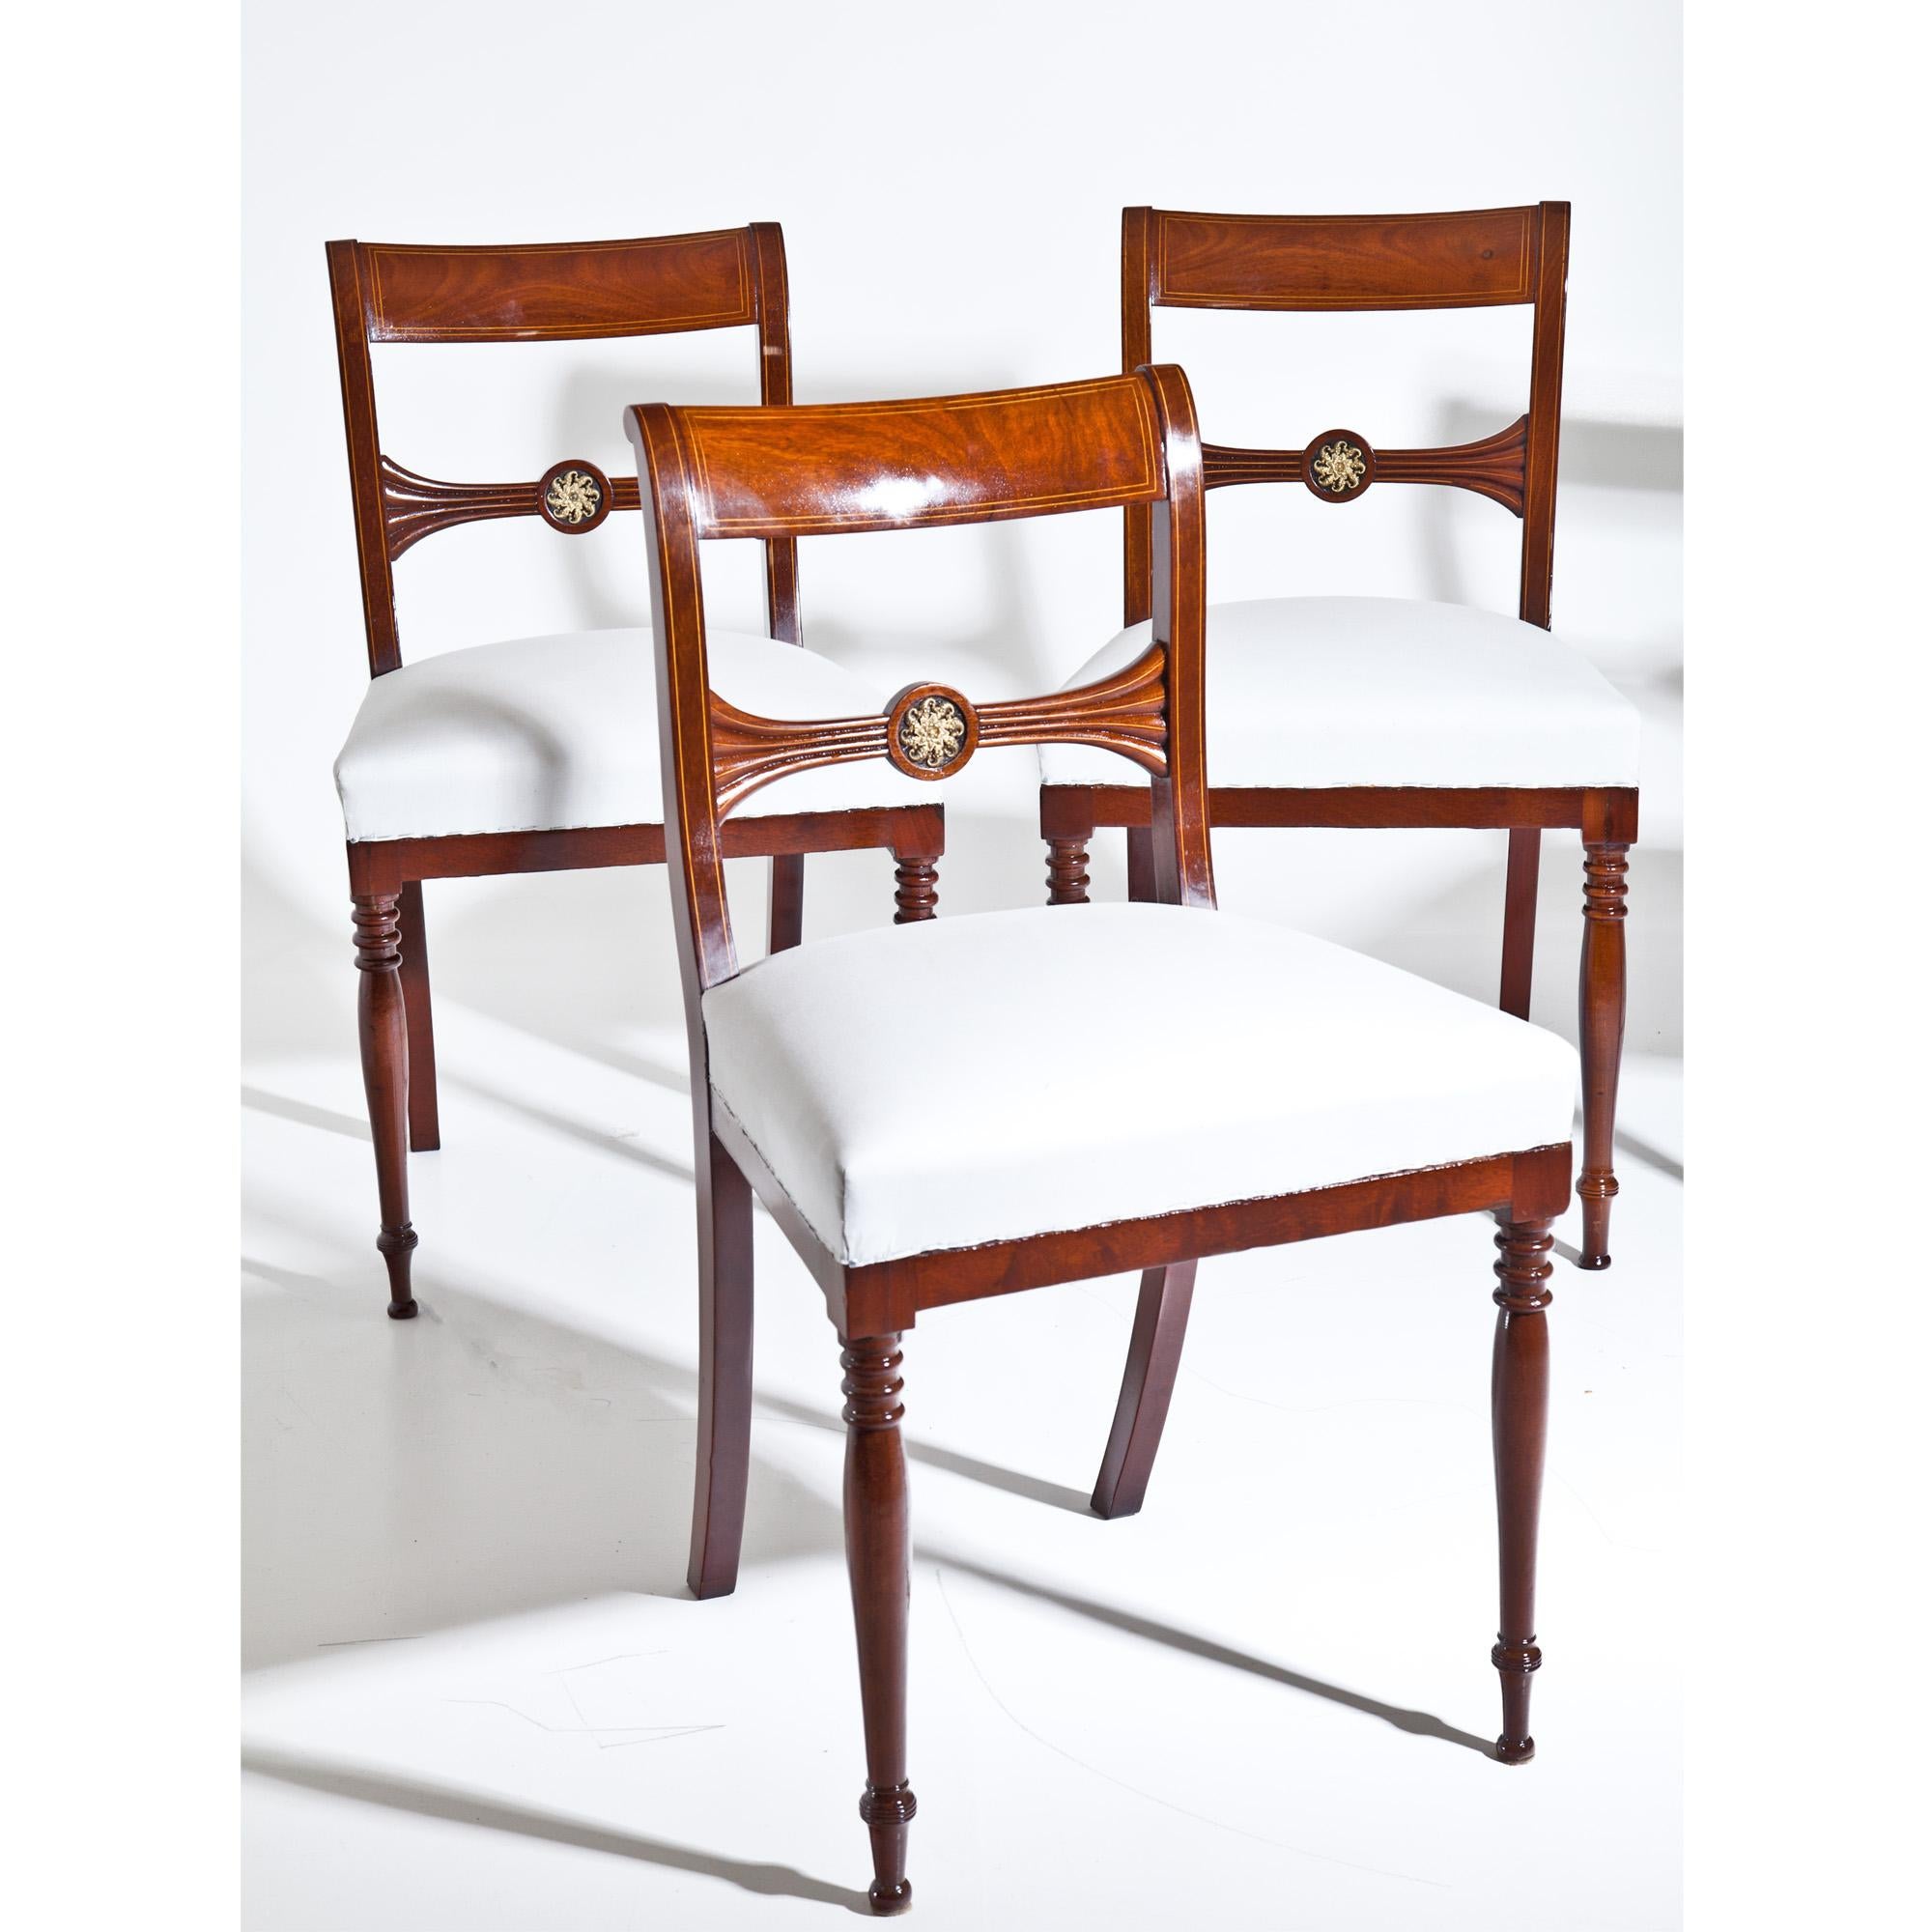 Neoclassical Chairs, Probably Berlin, circa 1825-1830